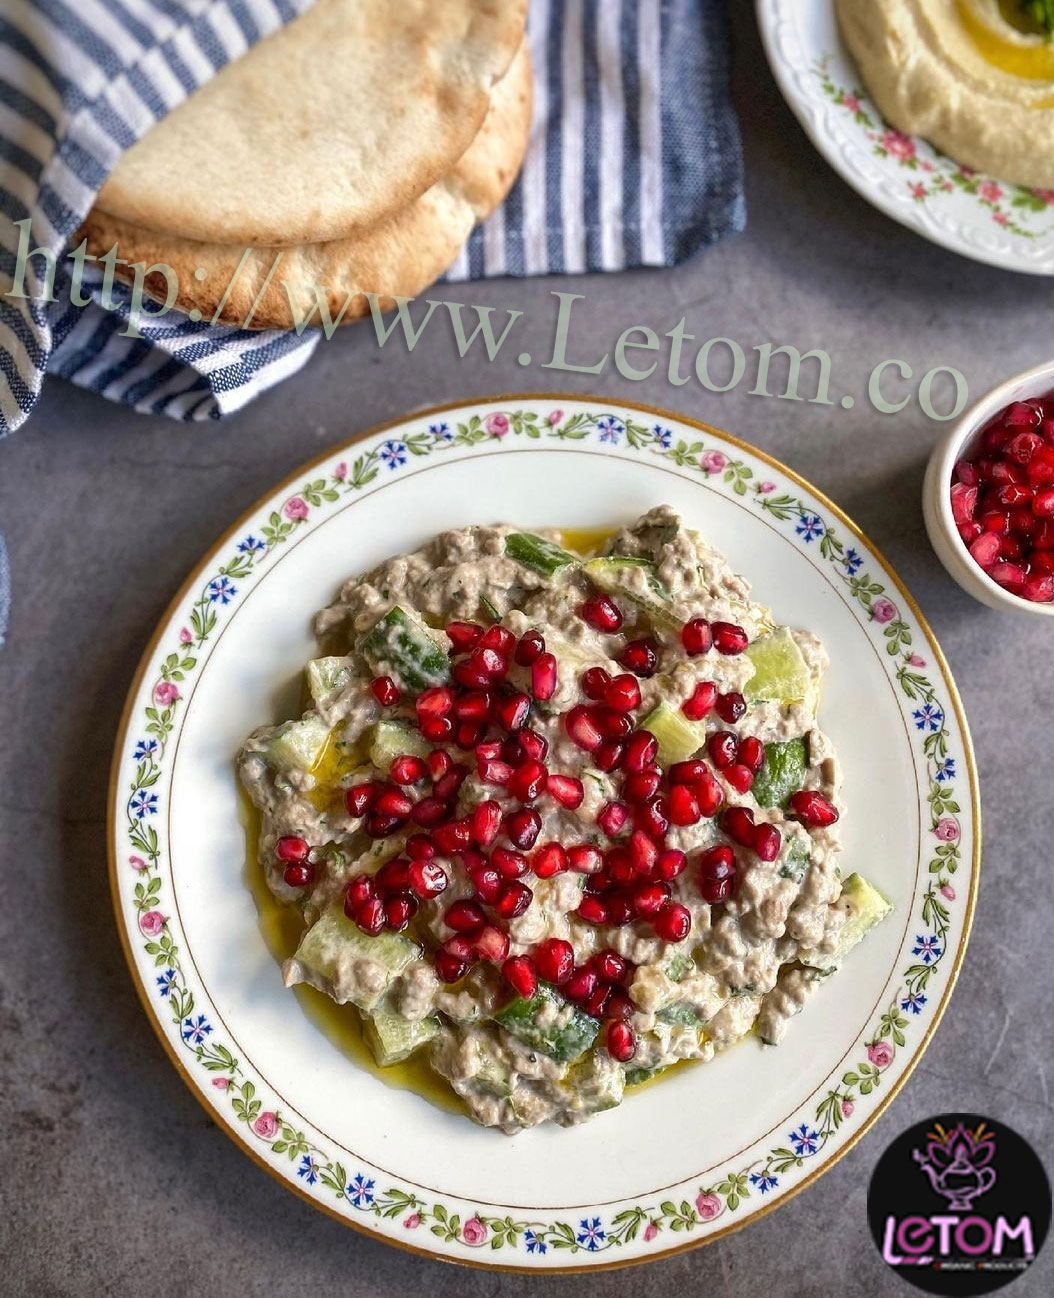 A plate of vegetarian food with pomegranate